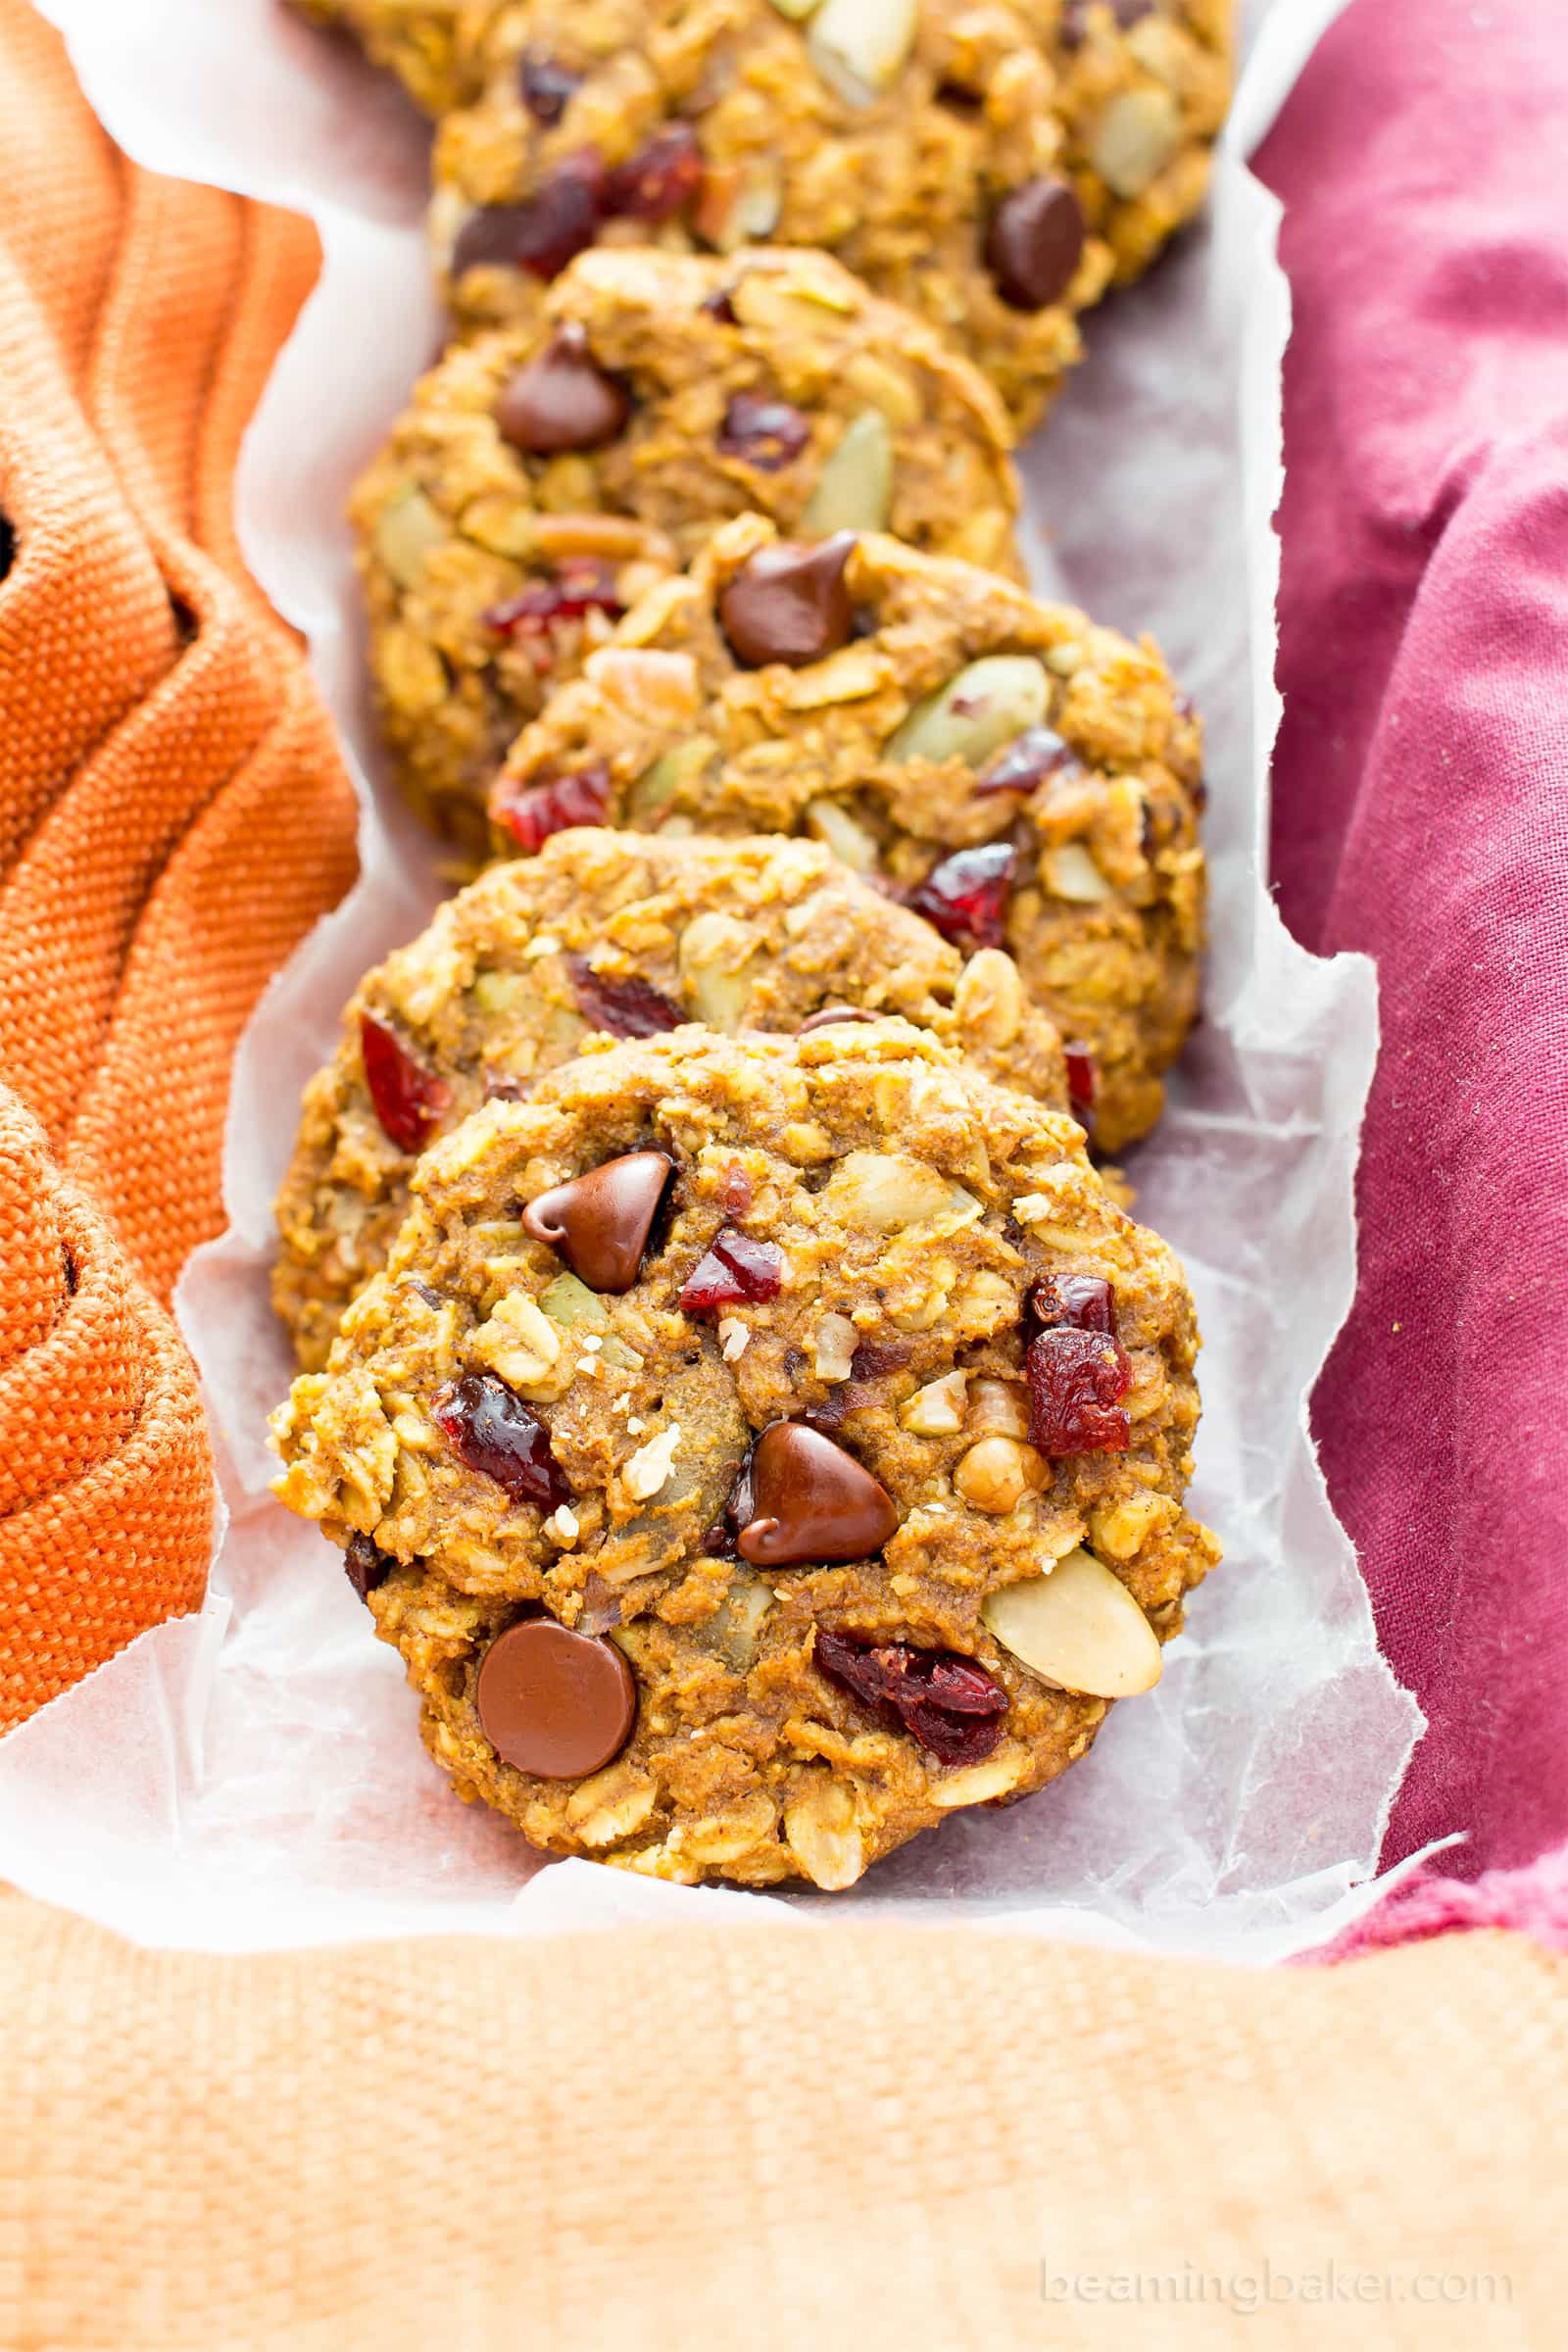 Pumpkin Chocolate Chip Oatmeal Breakfast Cookies (V, GF): Soft, chewy pumpkin oatmeal cookies packed with chocolate chips and pumpkin seeds. Perfect for breakfast or an afternoon treat! #Vegan #GlutenFree #DairyFree #Cookies #Baking #Breakfast | Recipe on BeamingBaker.com